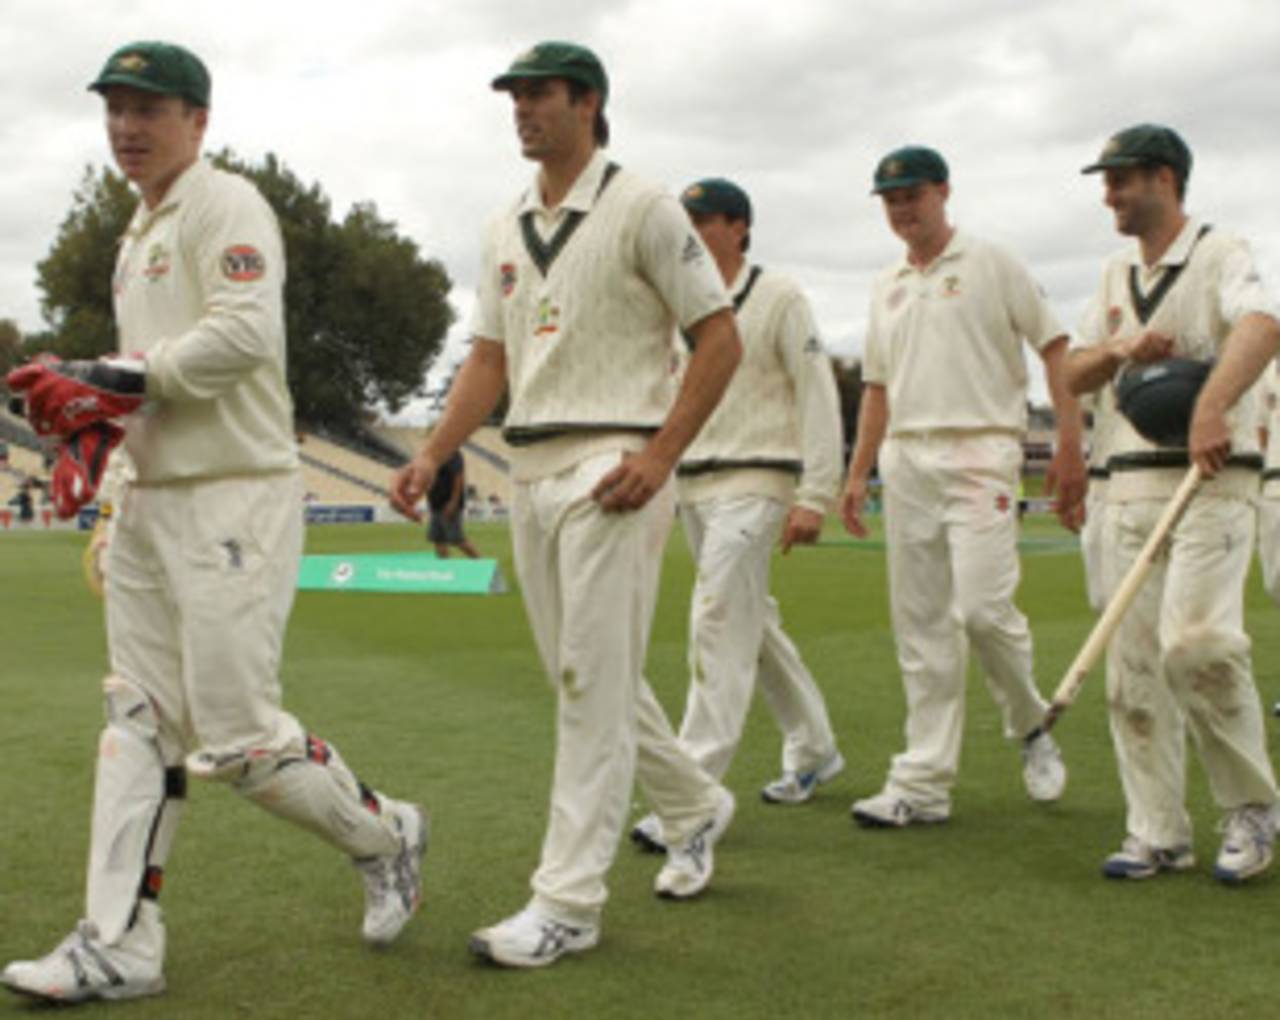 Mitchell Johnson finished the game with 10 wickets, New Zealand v Australia, 2nd Test, Hamilton, 5th day, March 31, 2010